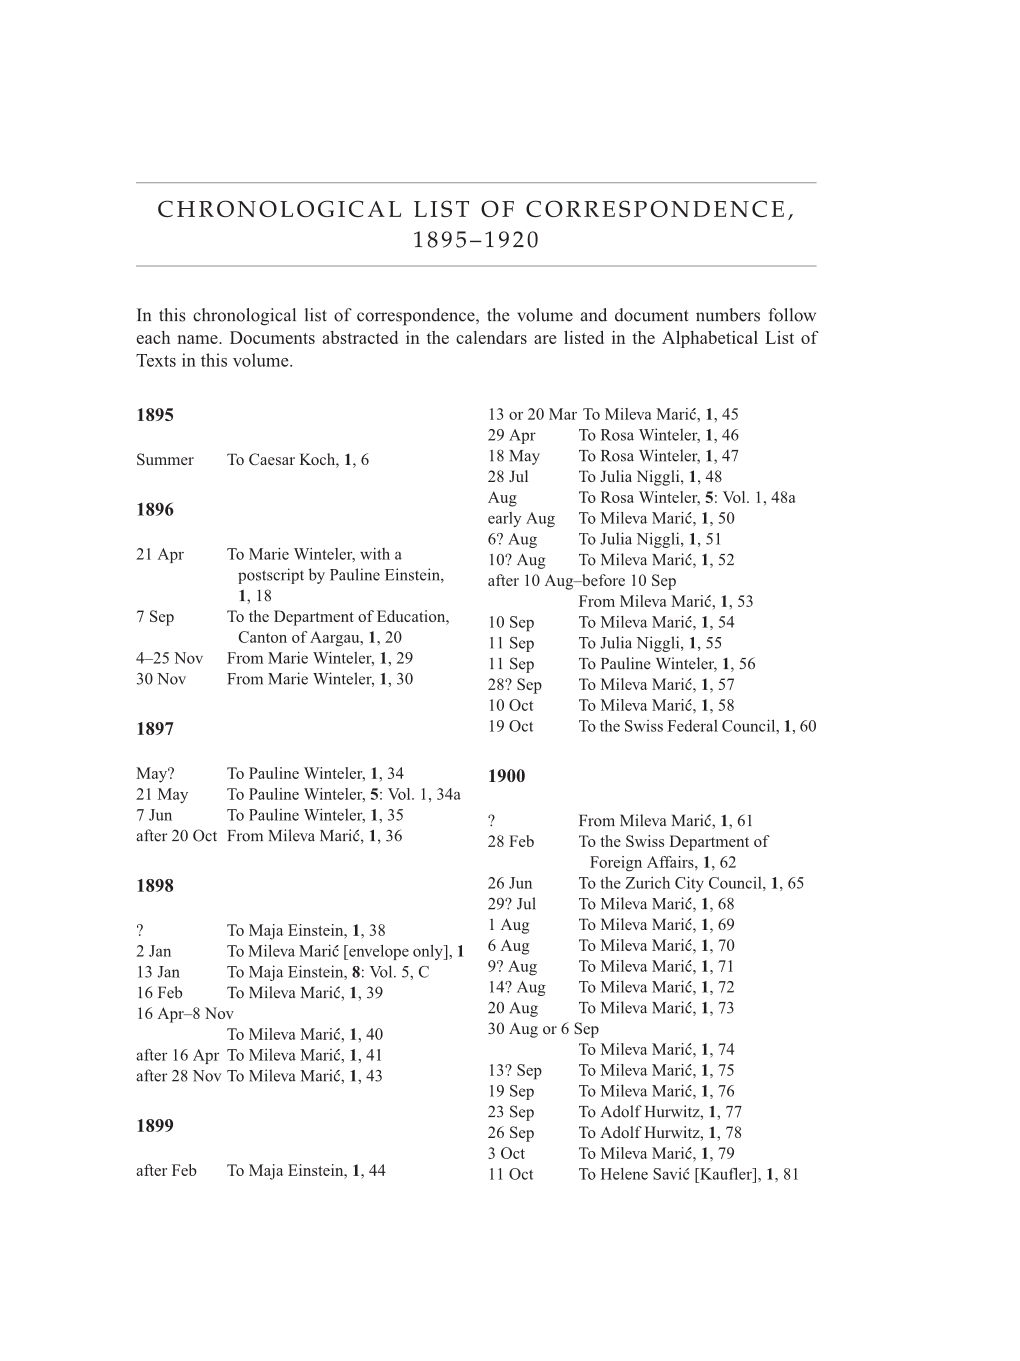 Volume 11: Cumulative Index, Bibliography, List of Correspondence, Chronology, and Errata to Volumes 1-10 page 137